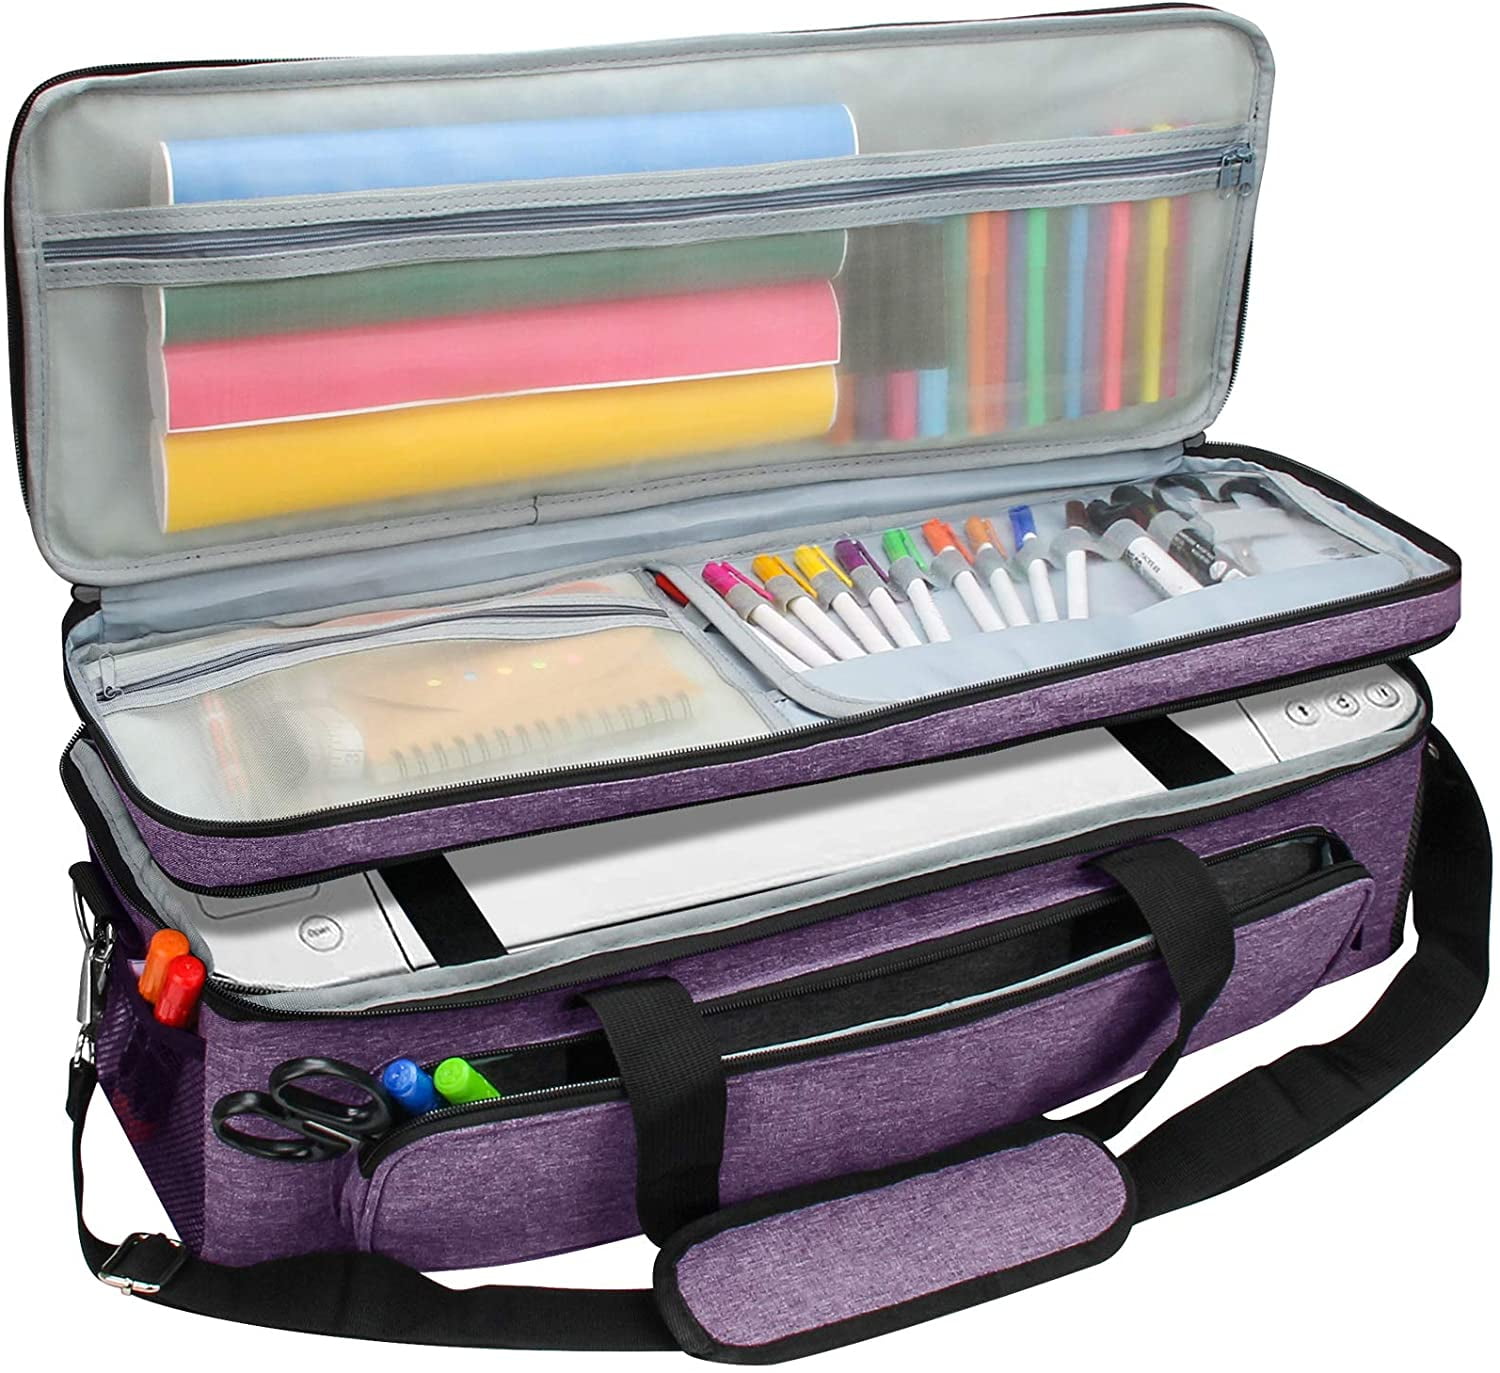 Explore Air 2 and Accessories Scrapbooking Die-Cut Machine Covers Organizer Cricut Accessories IMAGINING Dust Cover with Zipper Pocket Compatible with Cricut Maker Pink